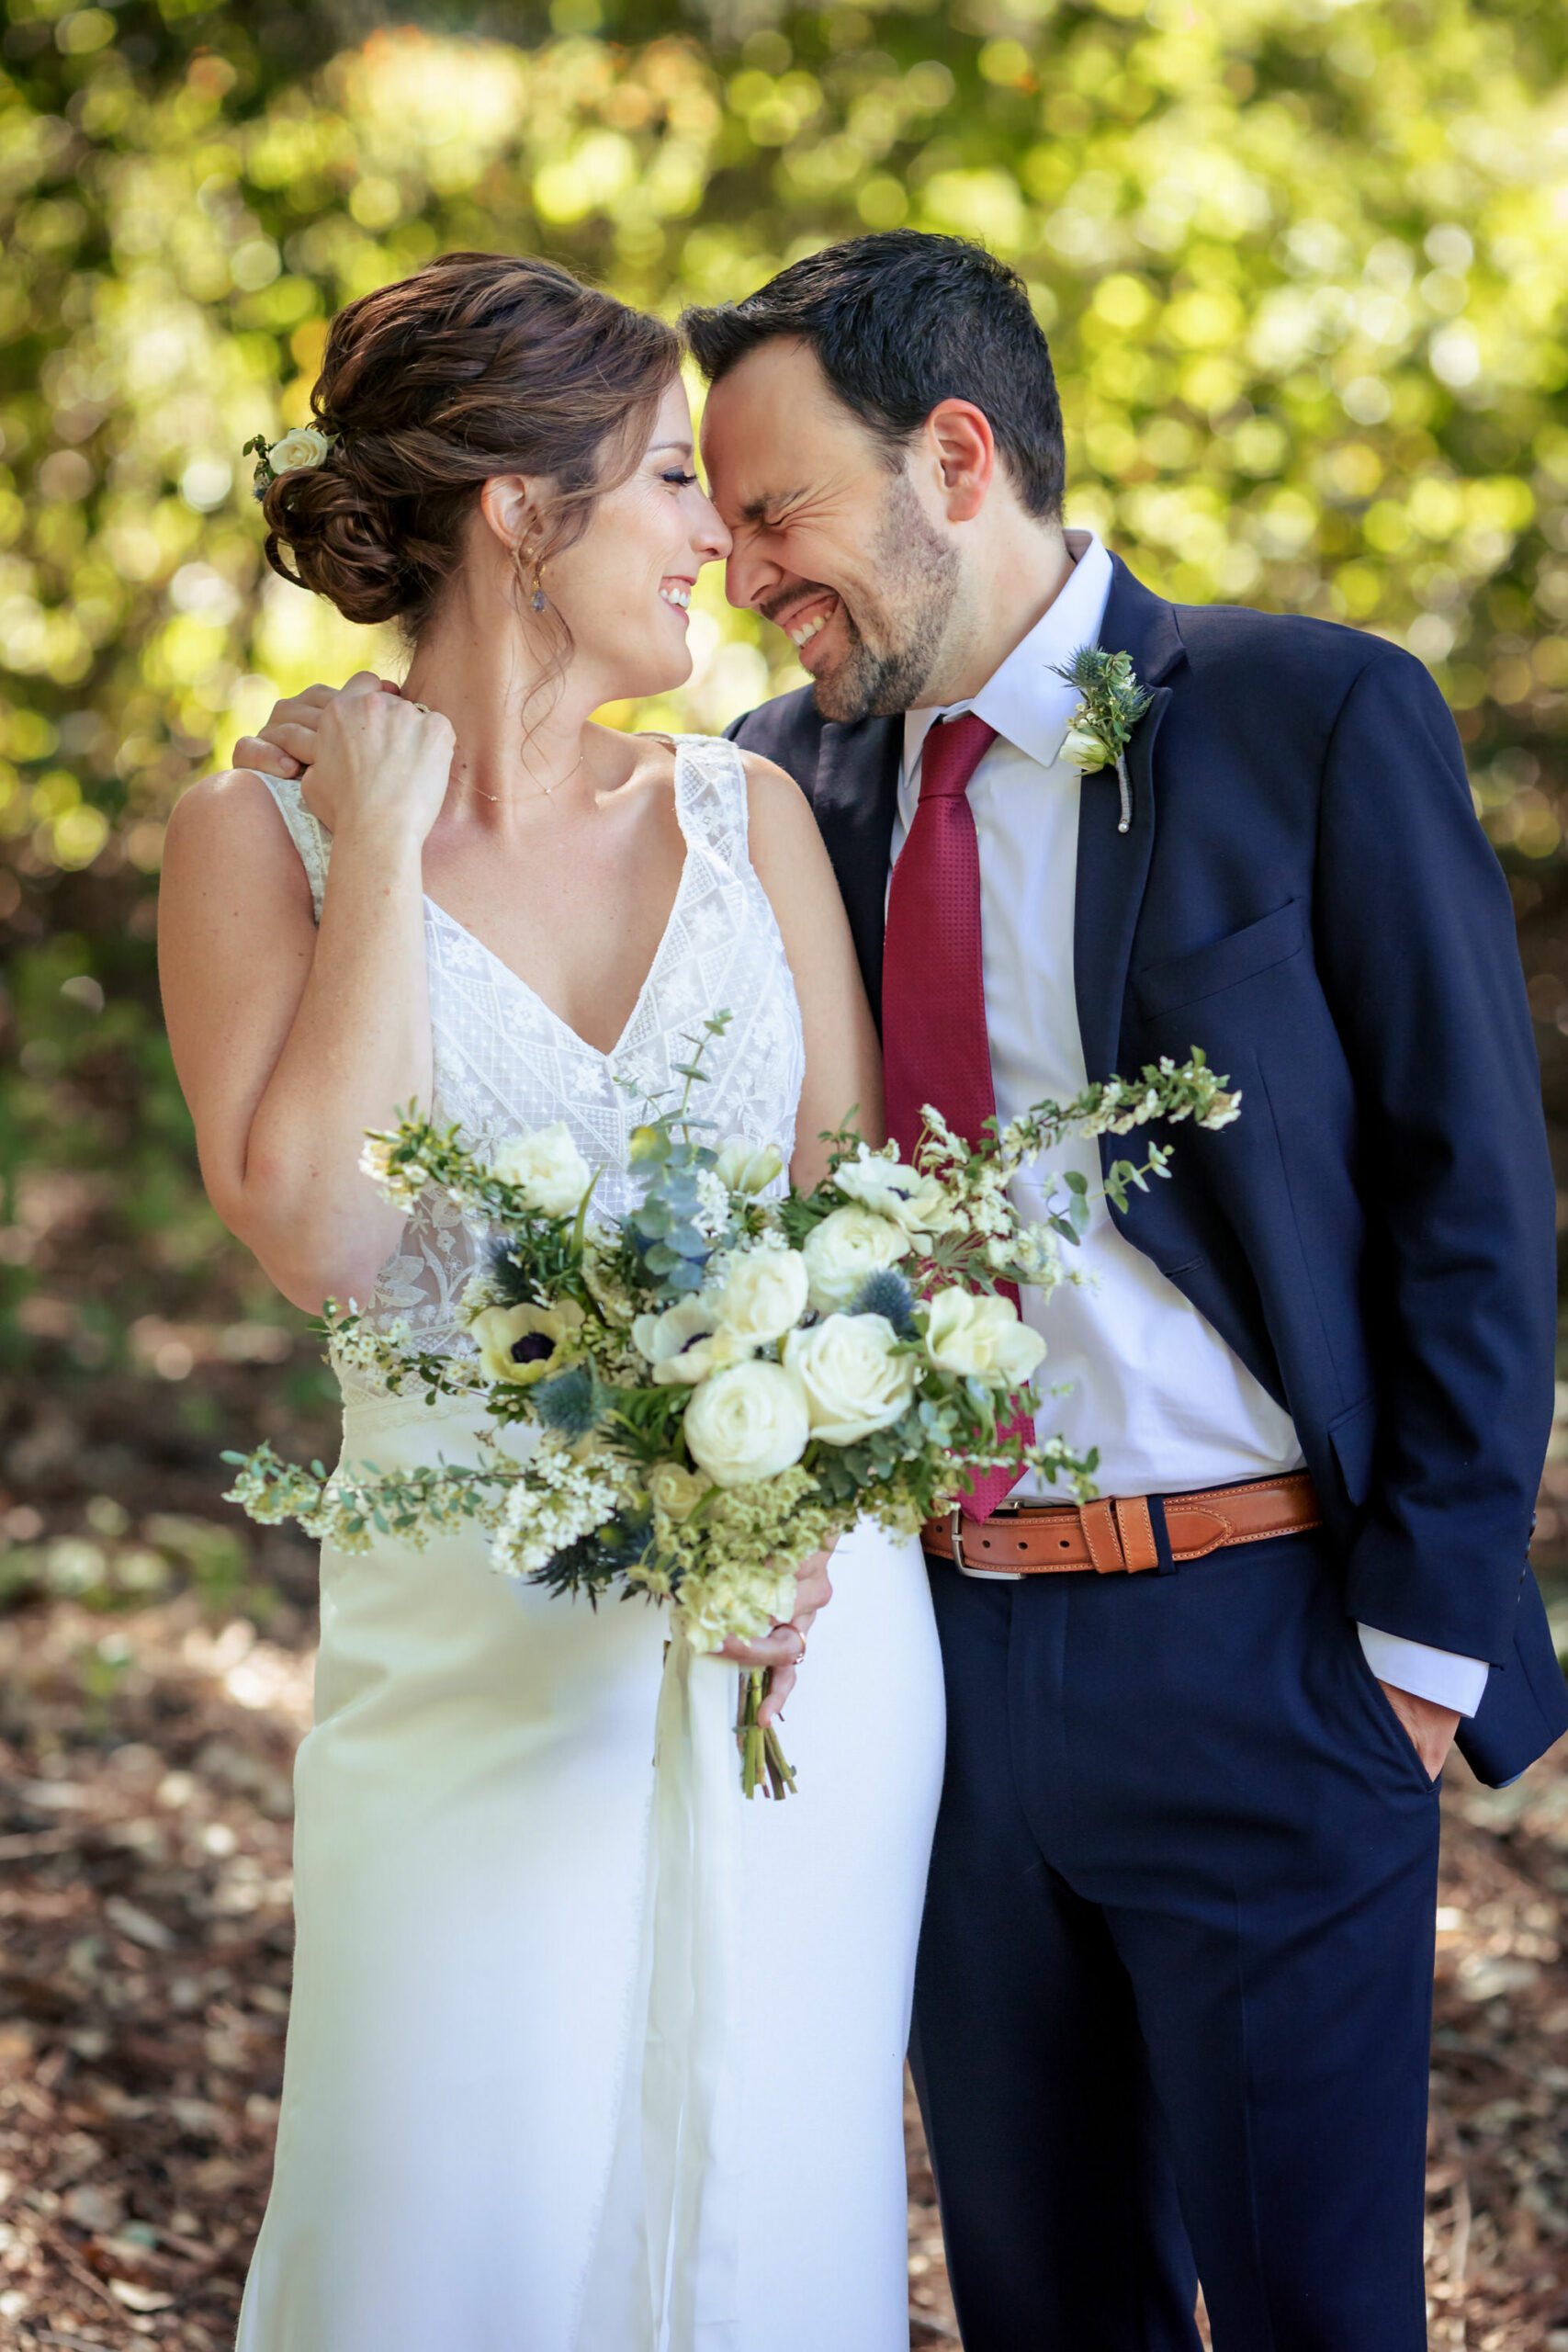 Candid moment of a bride in a lace top wedding dress and a groom wearing a navy blue suit with a red tie.